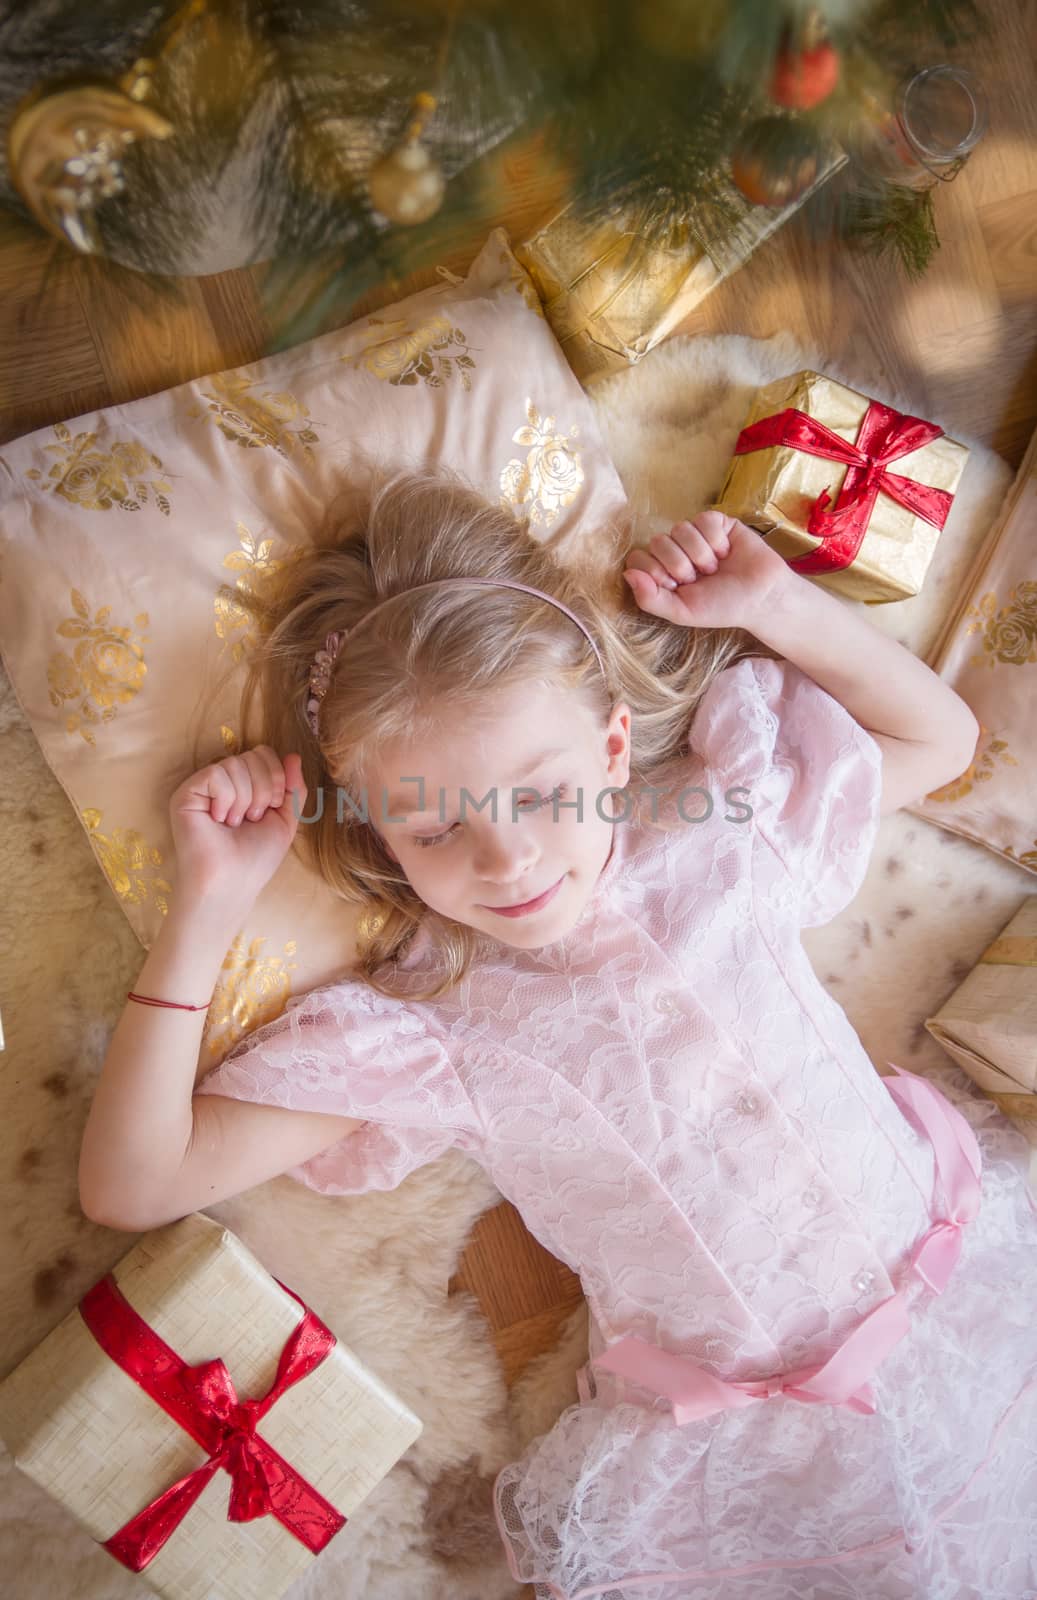 Cute girl dreaming under Christmas tree with gifts, top view